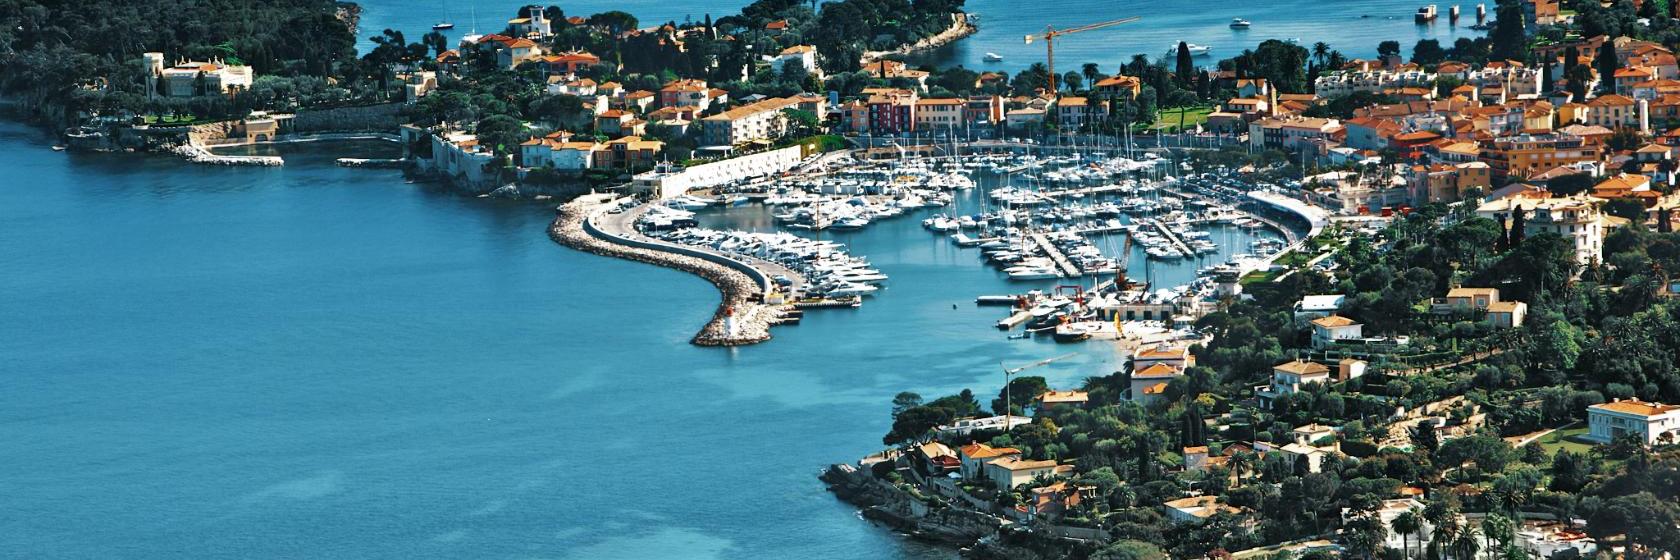 The 10 best hotels & places to stay in Saint-Jean-Cap-Ferrat, France - Saint -Jean-Cap-Ferrat hotels